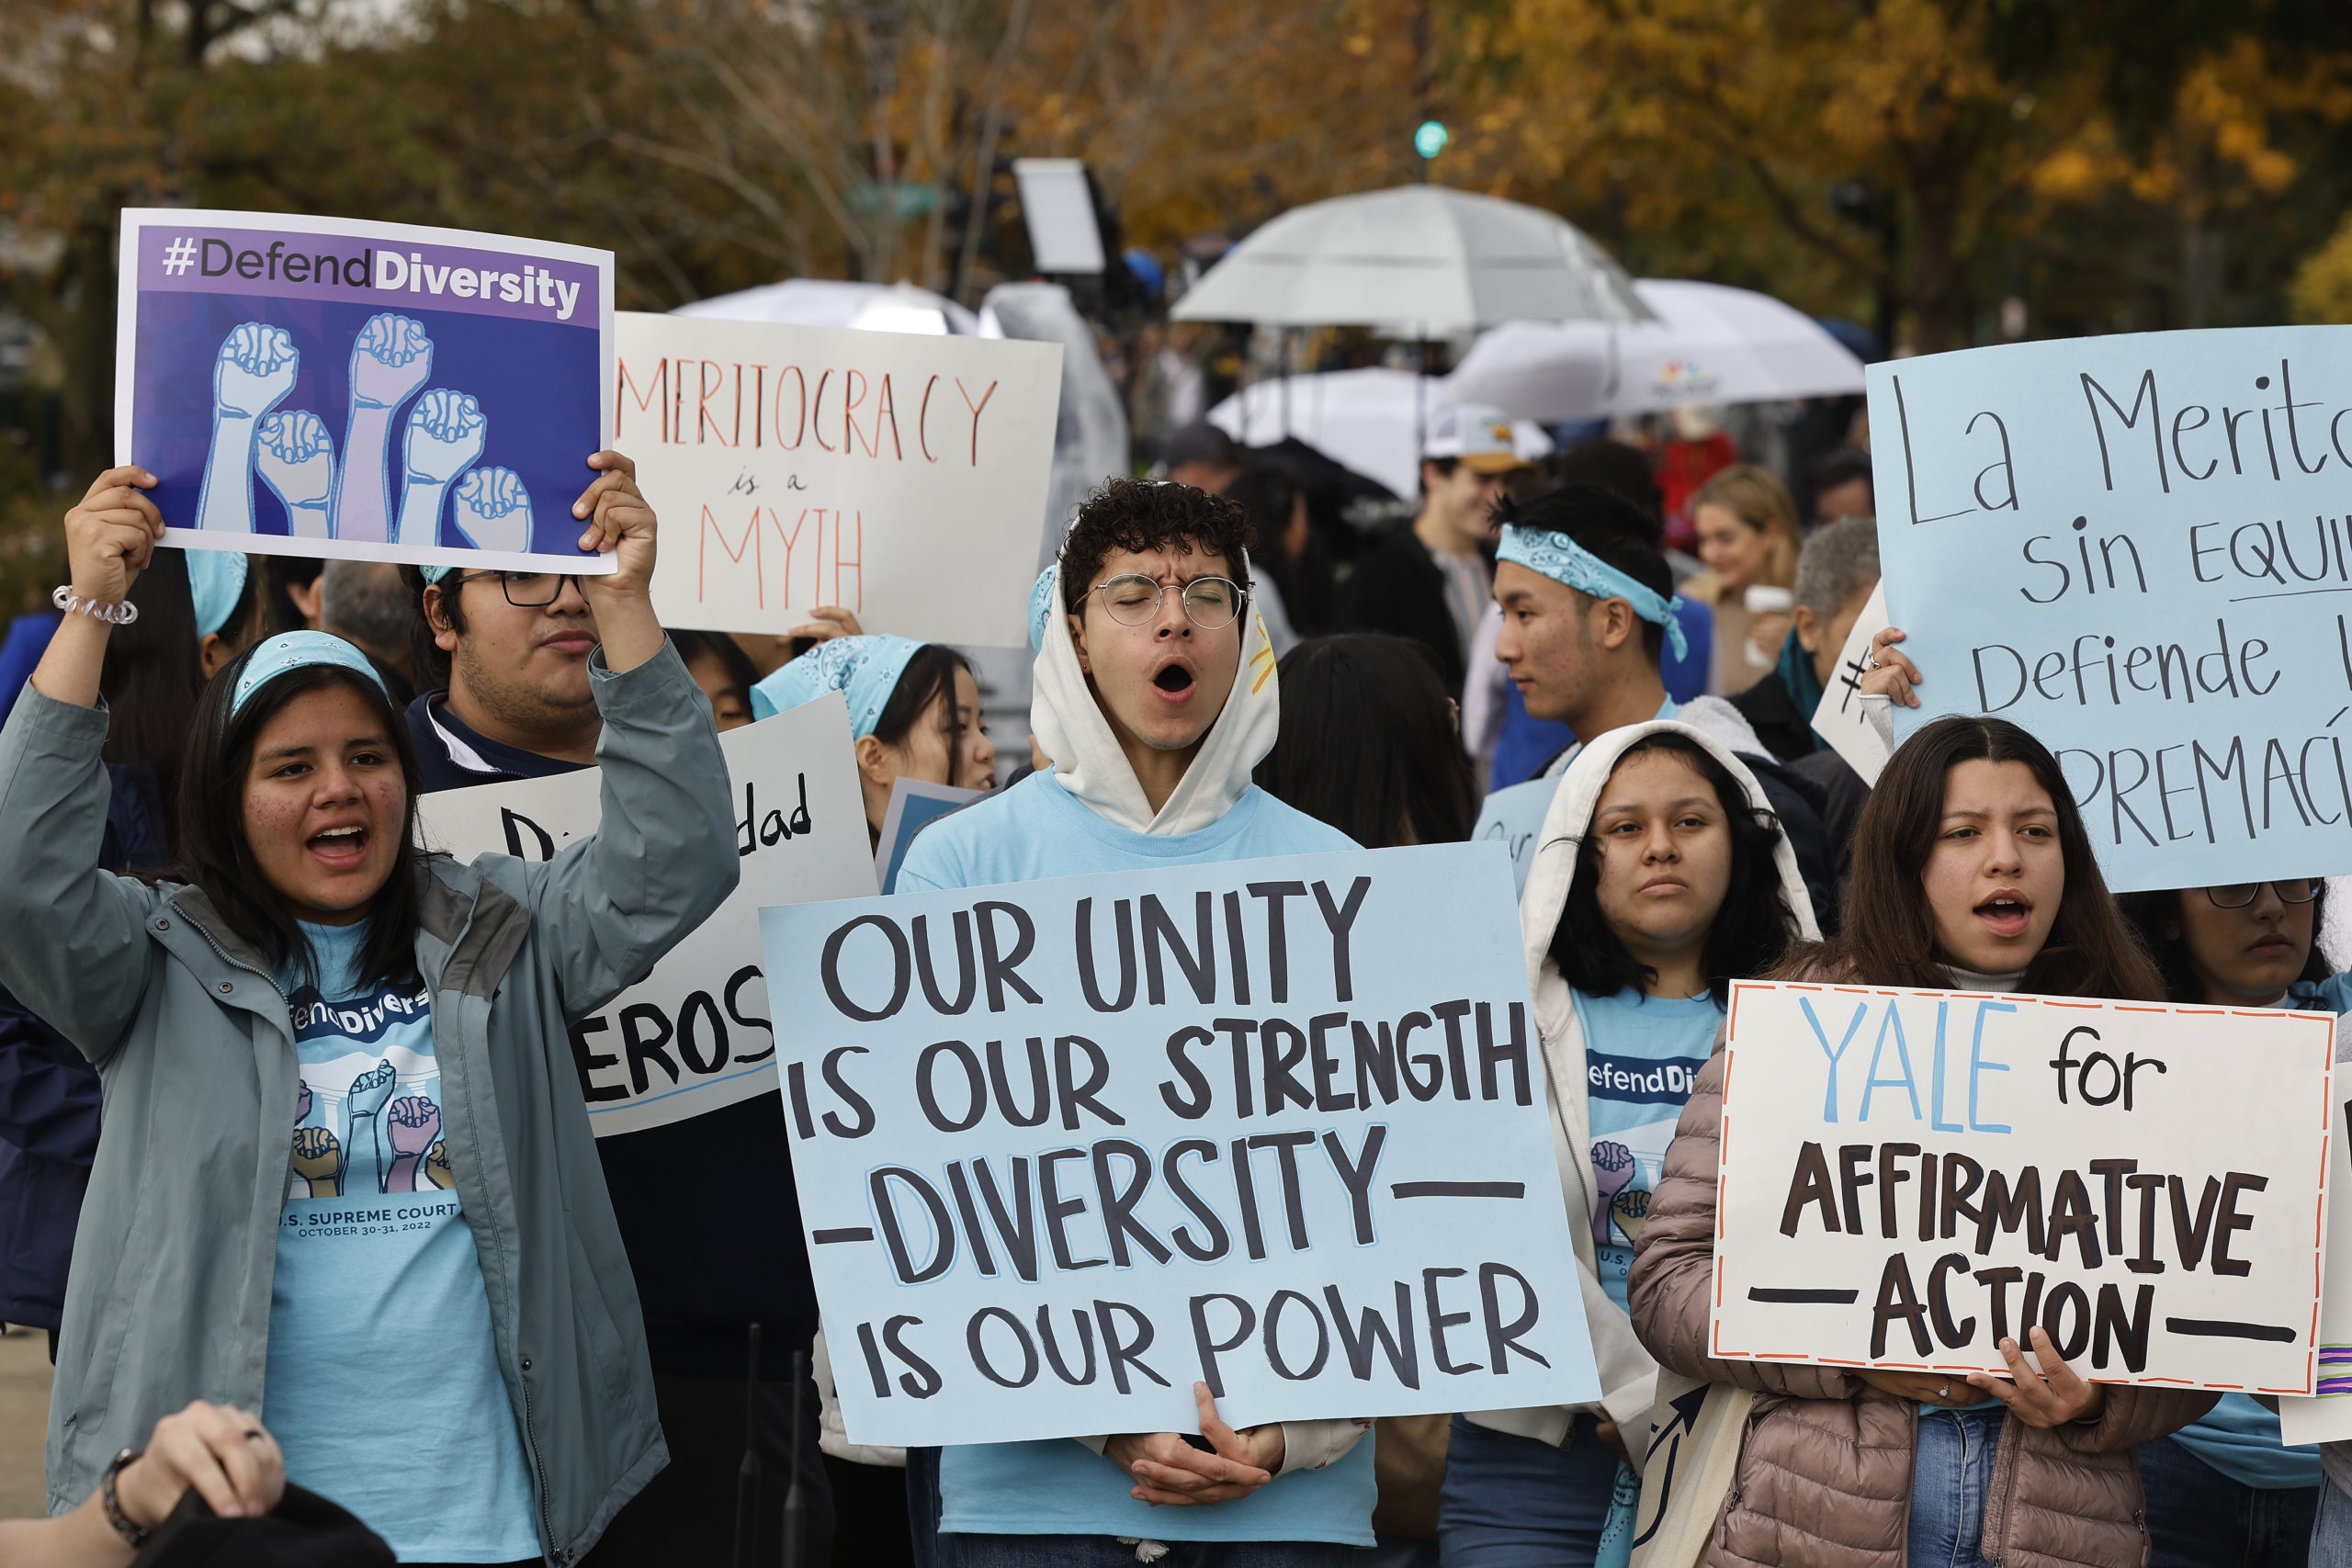 Proponents for affirmative action in higher education rally in front of the U.S. Supreme Court on October 31, 2022 in Washington, DC. The Court will hear arguments in two cases, Students for Fair Admissions v. President and Fellows of Harvard College and Students for Fair Admissions v. University of North Carolina, regarding the consideration of race as one factor in college admission at the two elite universities, which will have an effect on most institutions of higher education in the United States. (Photo by Chip Somodevilla/Getty Images)